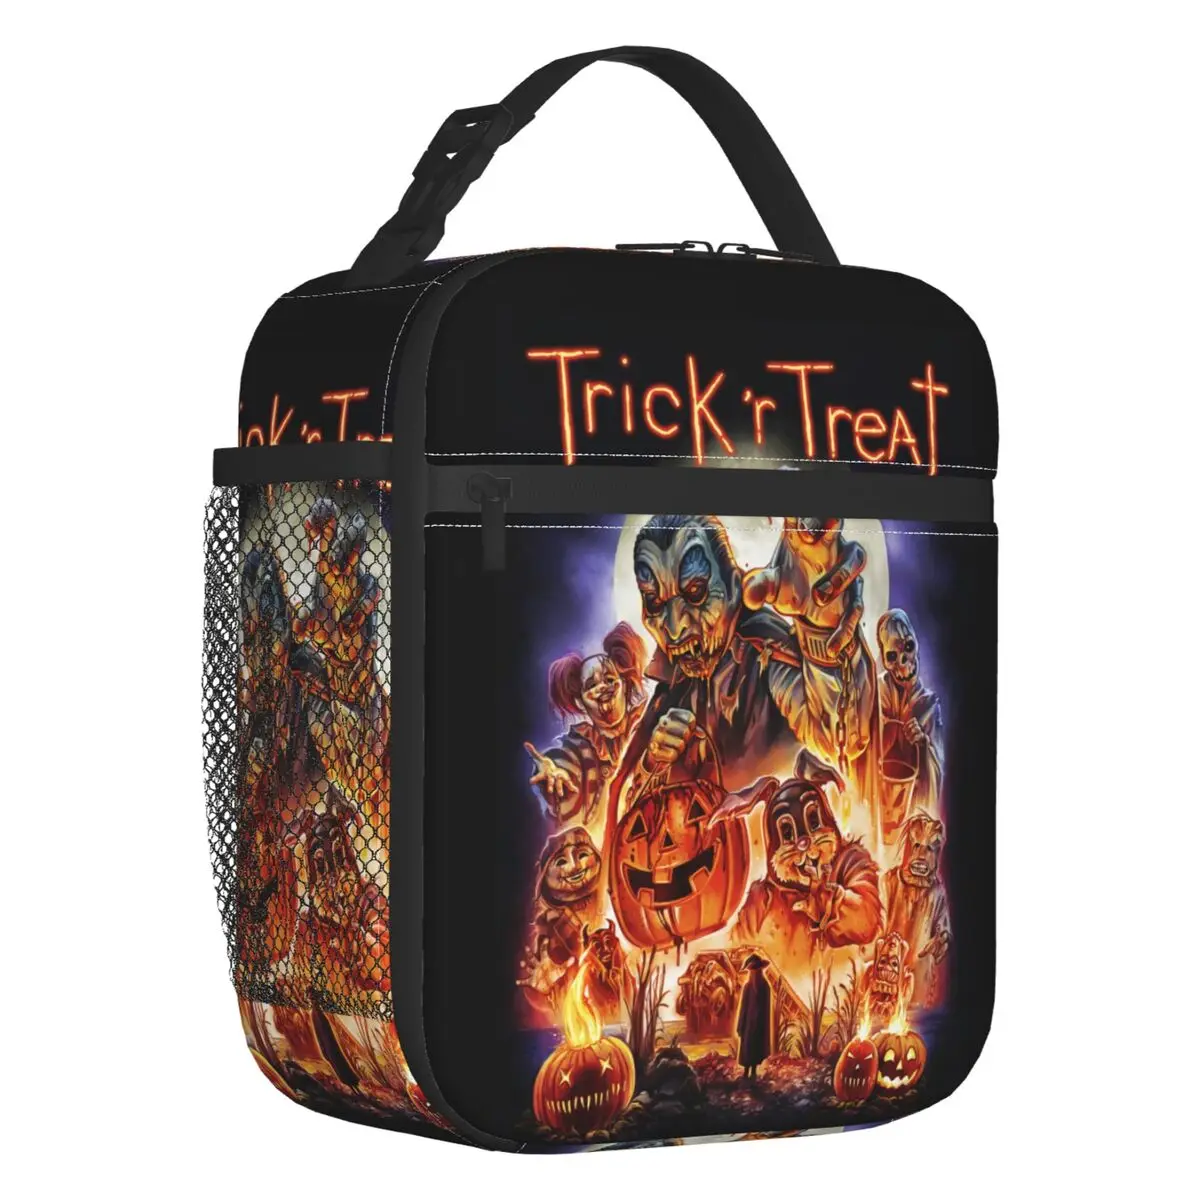 Halloween Spooky Movie Sam Trick 'R Treat Pumpkin Skeleton Insulated Lunch Bag Leakproof Thermal Cooler Lunch Box Beach Camping